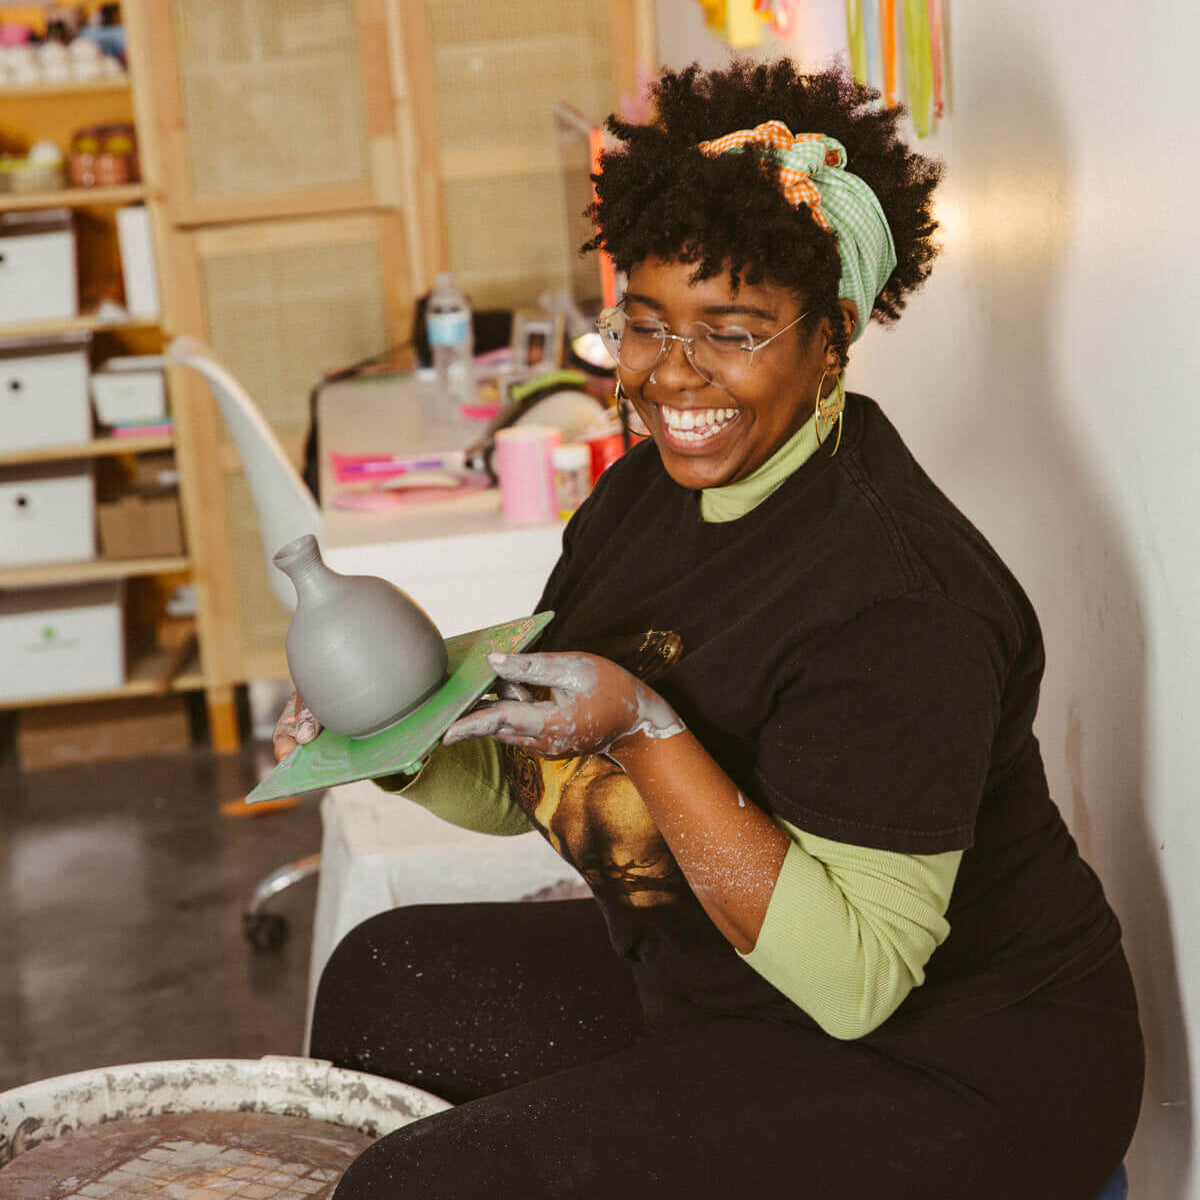 Ceramic Goddess, Sequoyah Johnson, Gives A Masterclass on Self-Ownership During Life's Seasons